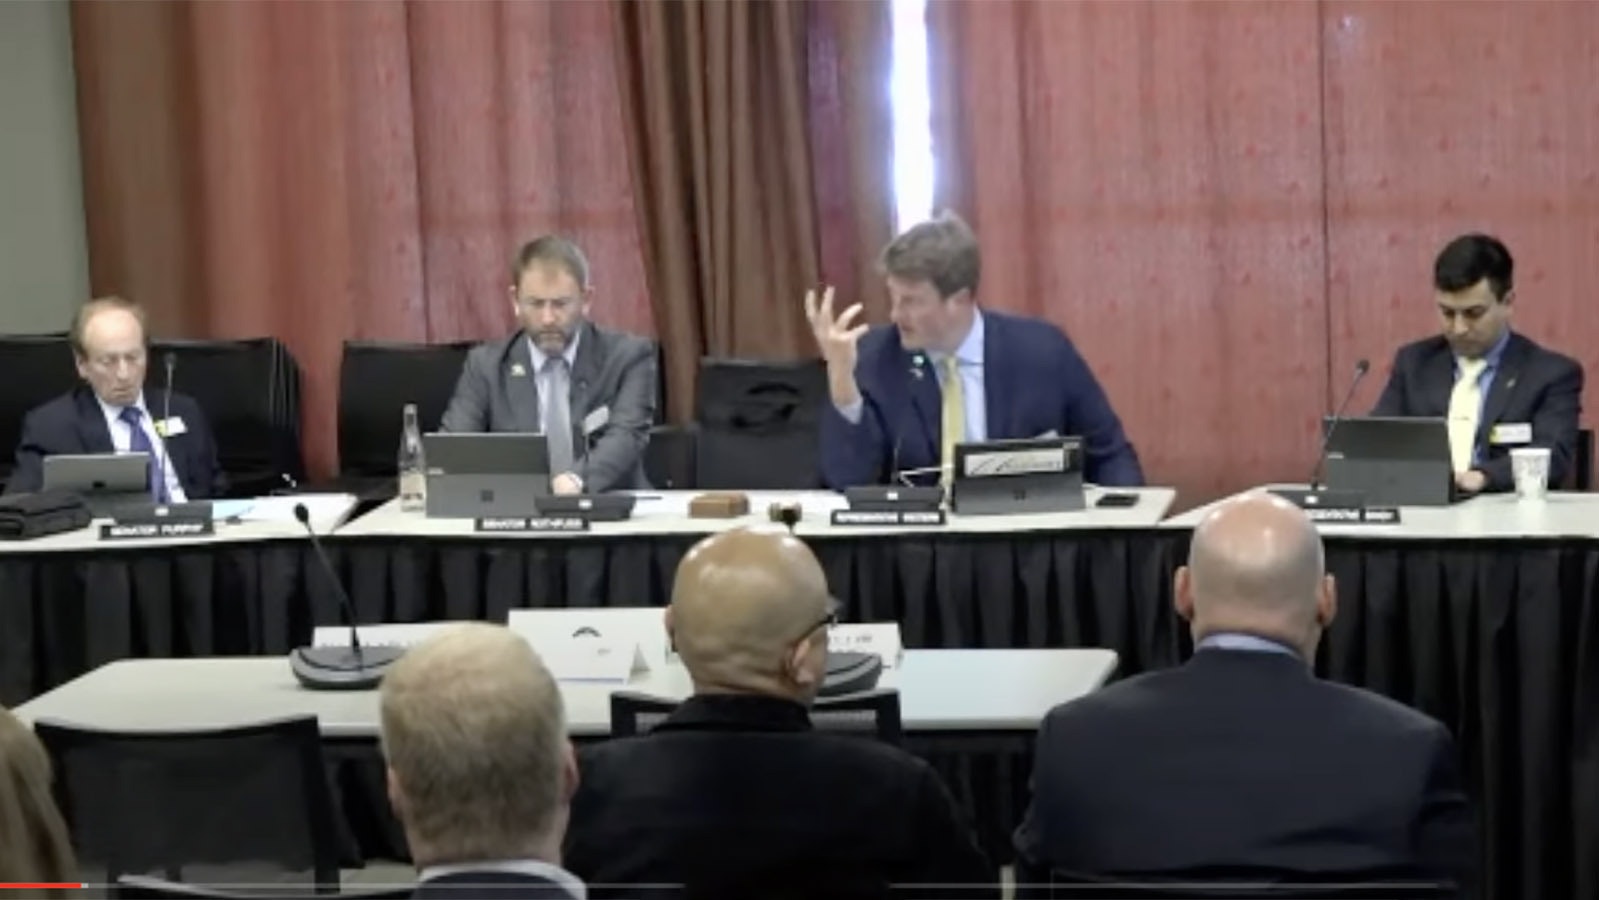 The Select Committee on Blockchain meets in Jackson this past week.